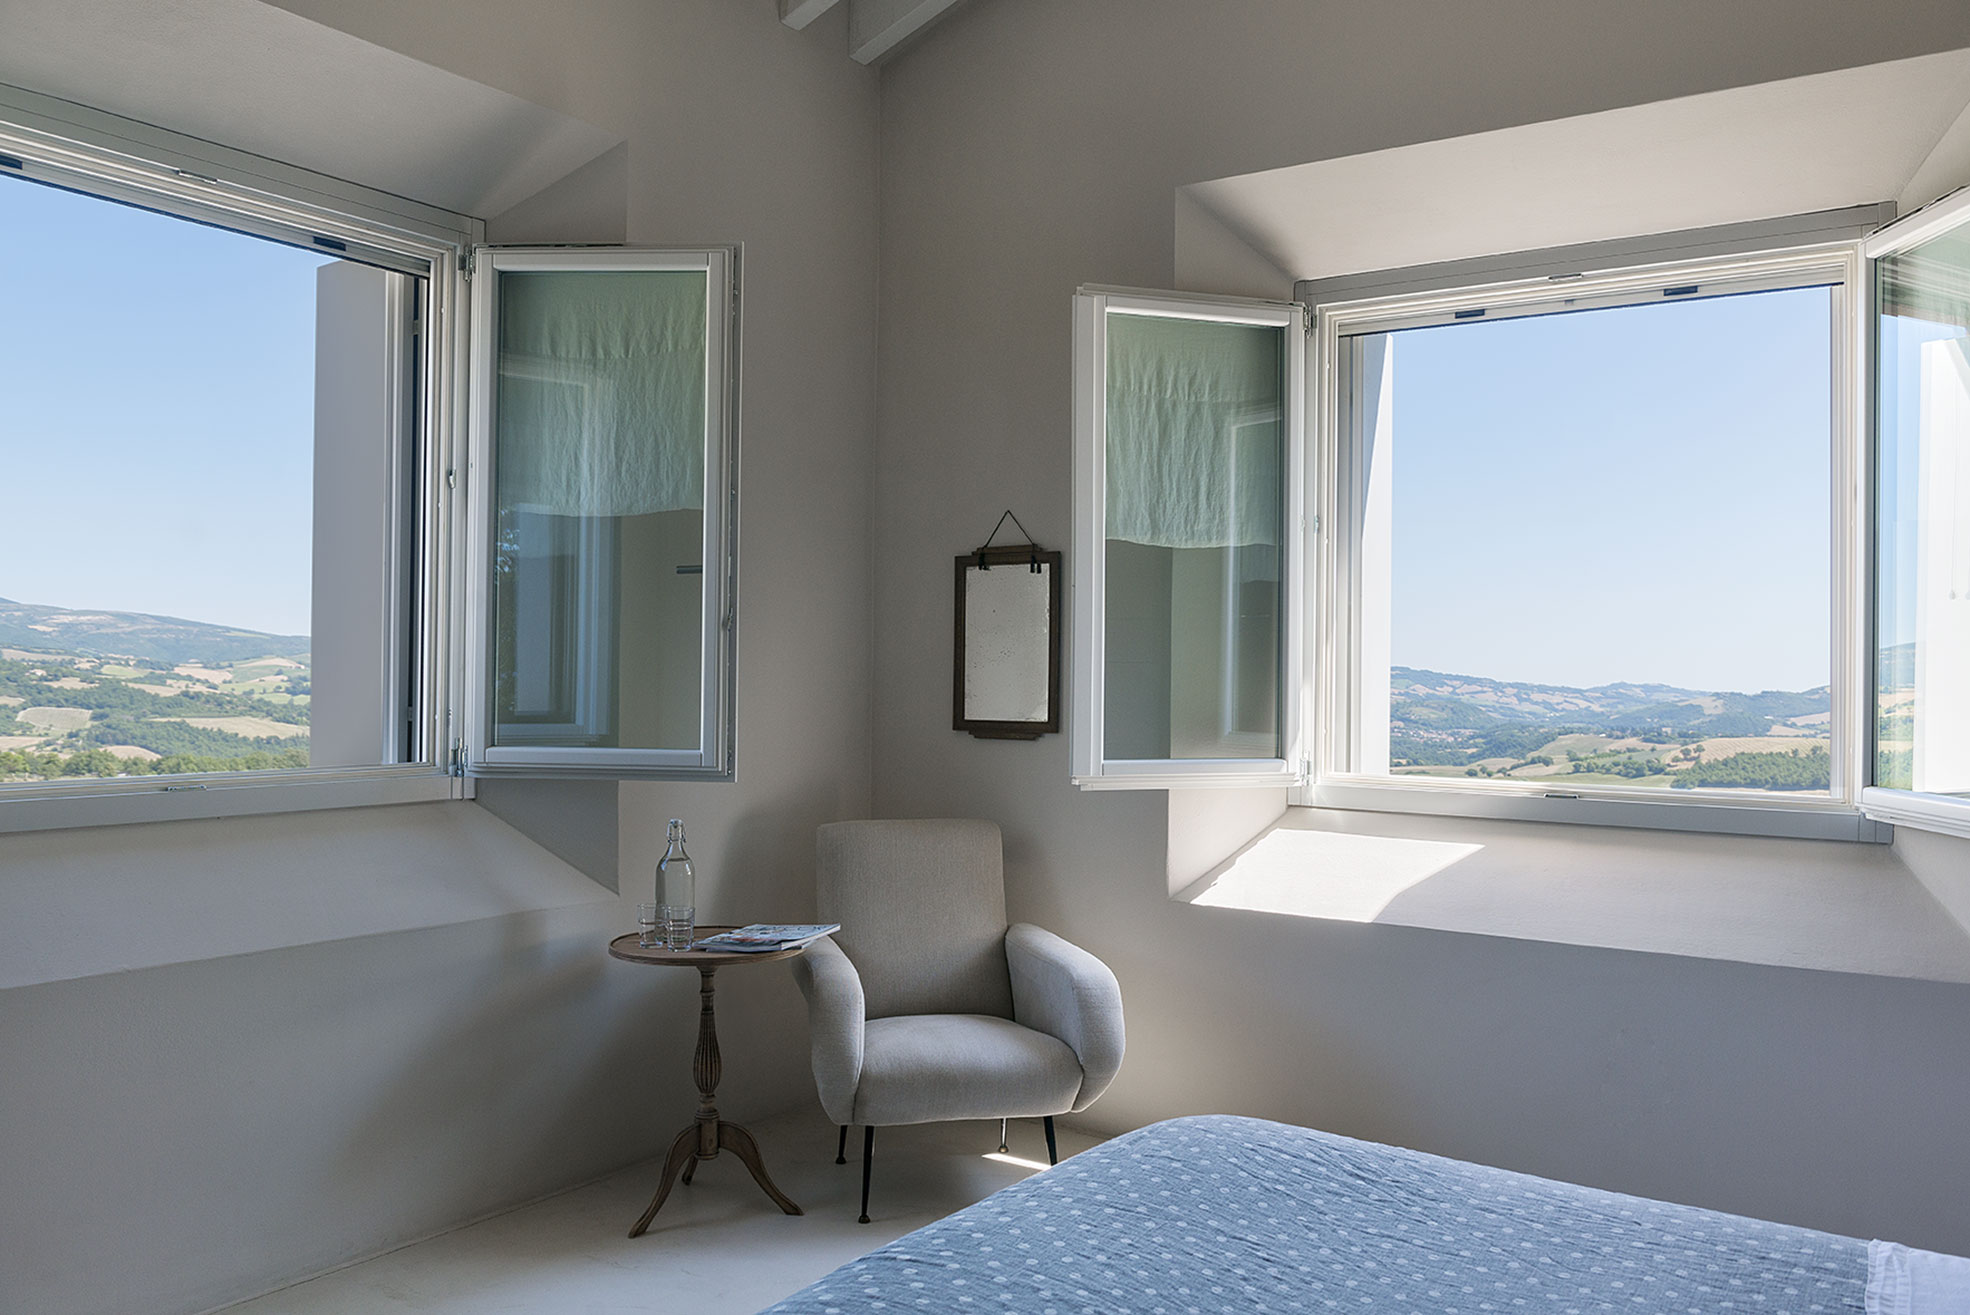 Bedroom with armchair and two windows of Malatetsa Maison de Charme in the marche hills Photographer Maria Teresa Furnari